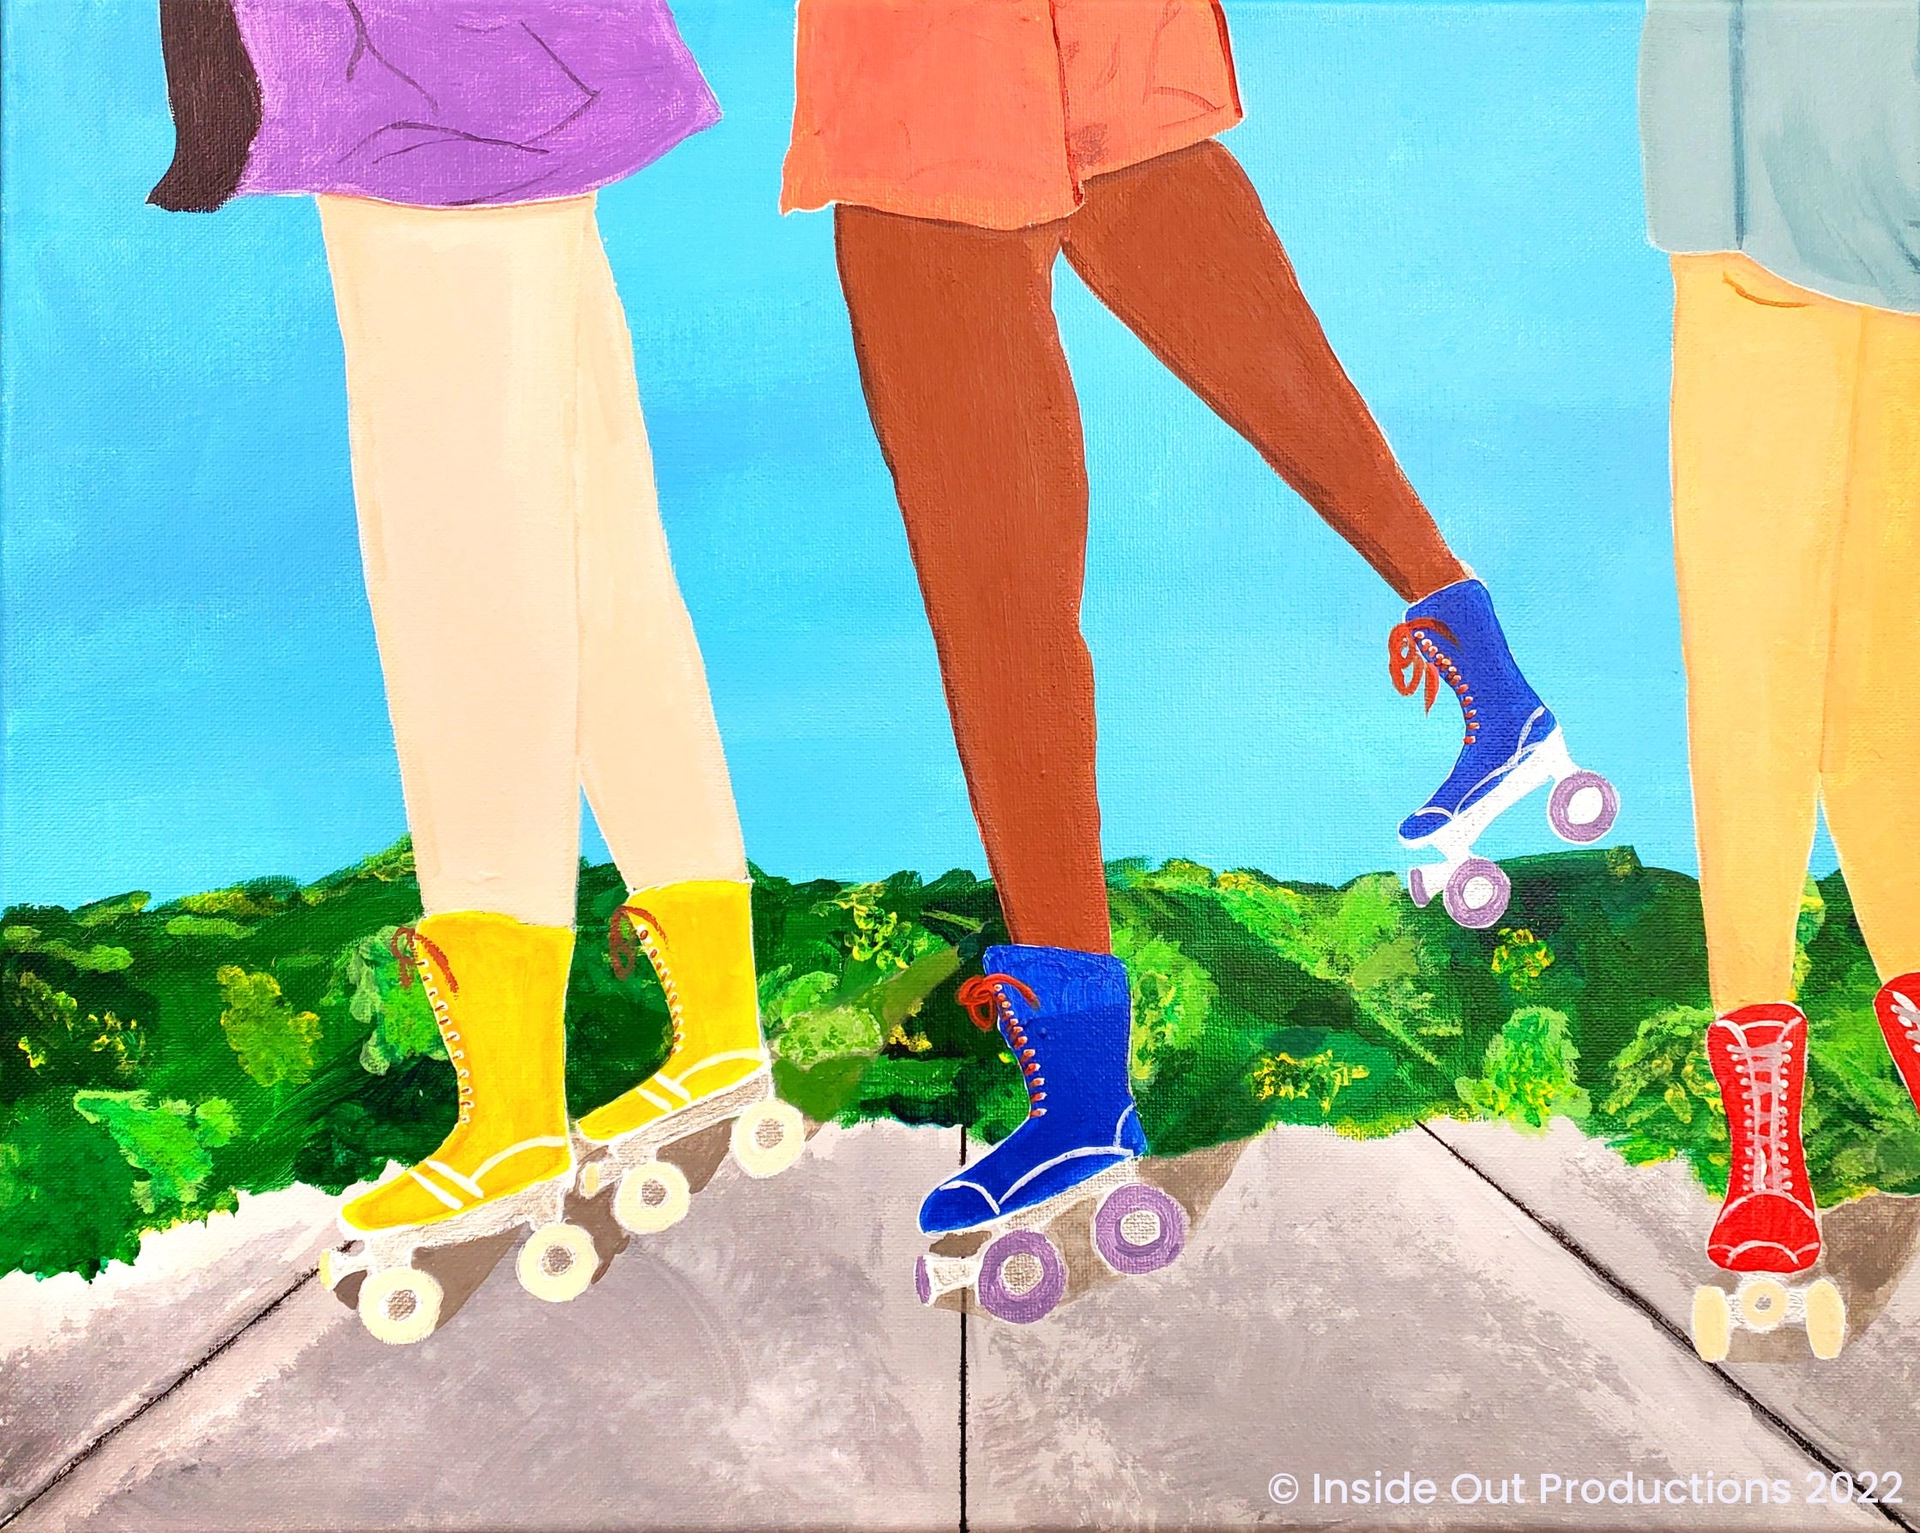 Three girls roller skate on a sidewalk by vegetation. The viewer only sees the girl's legs as they flow by. It is a bright sunny day and the colors are crisp and brilliant.